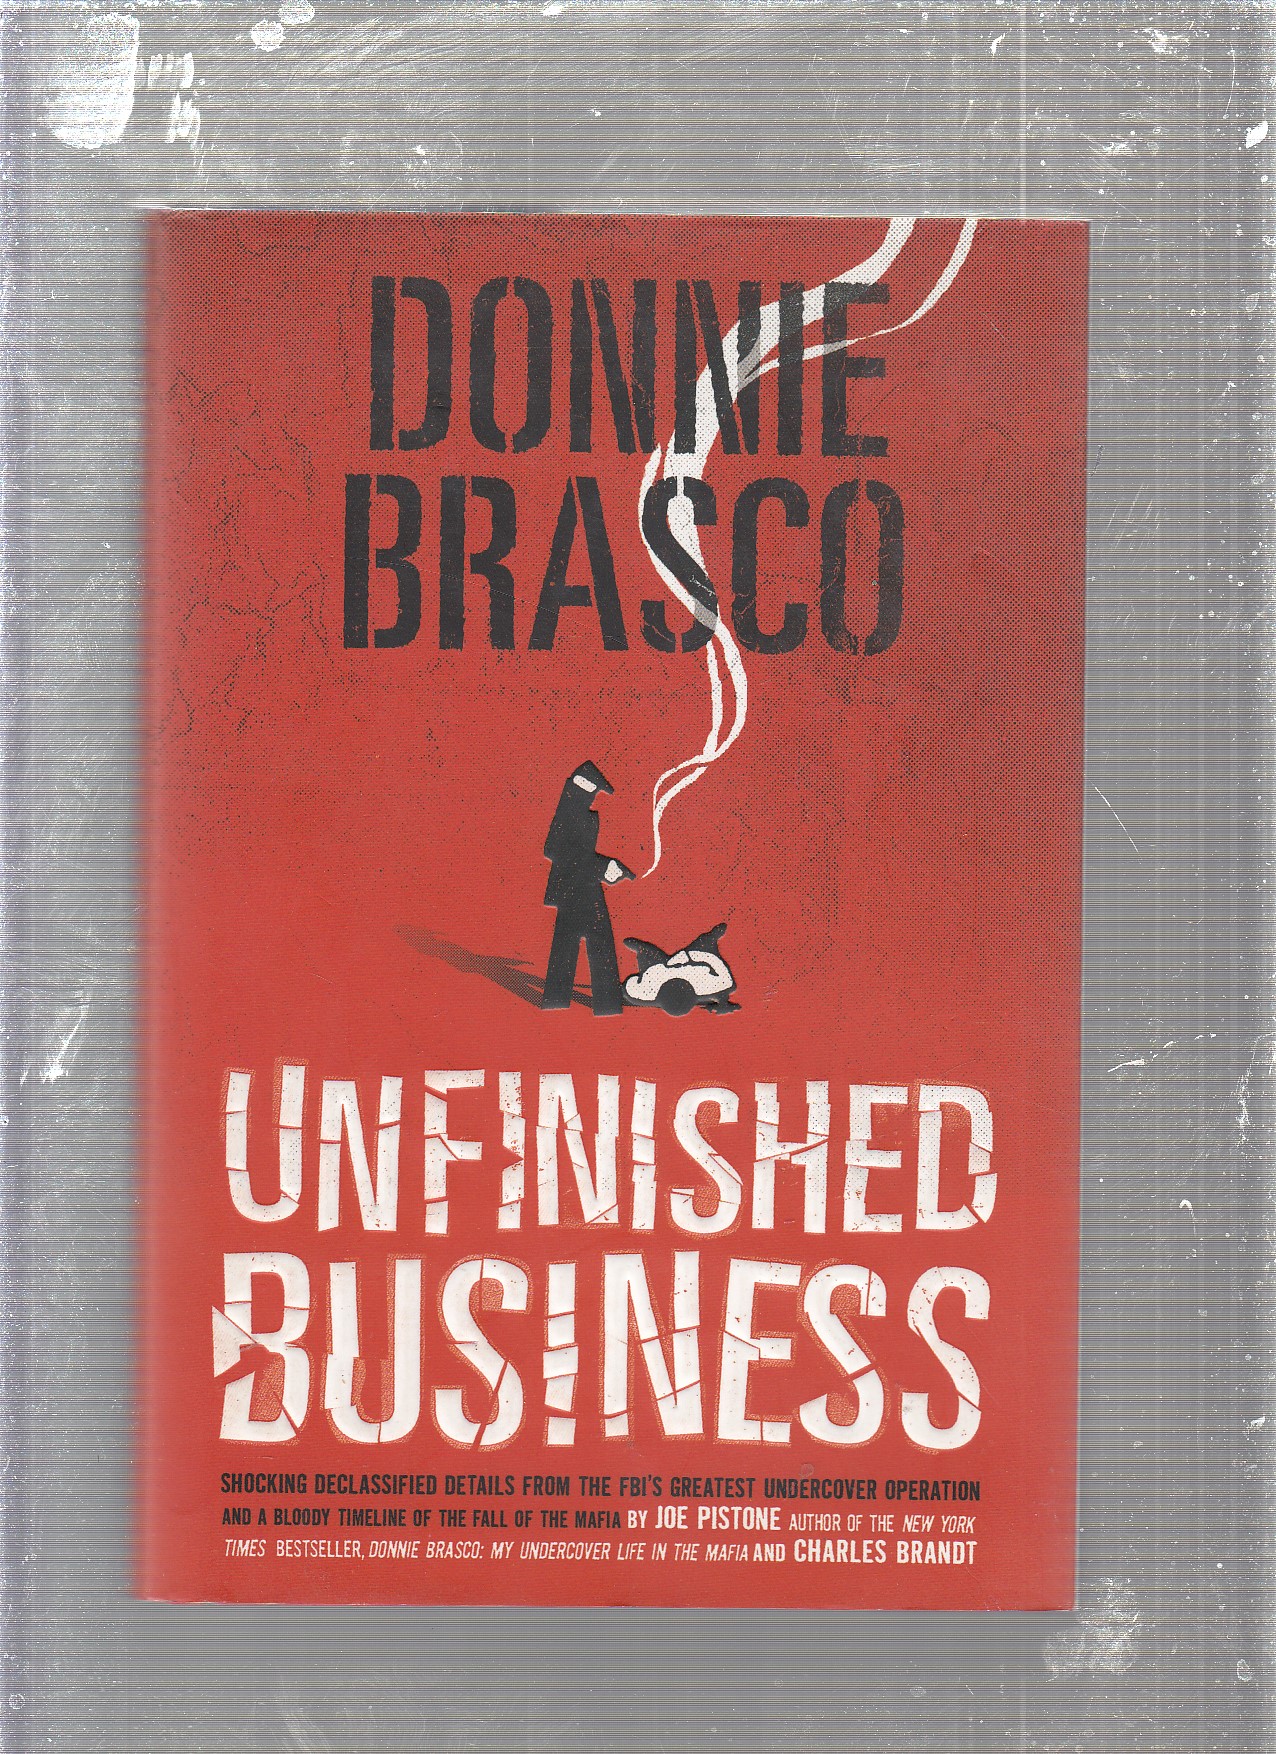 Donnie Brasco Unfinished Business - Joe Pistone and Charles Brandt